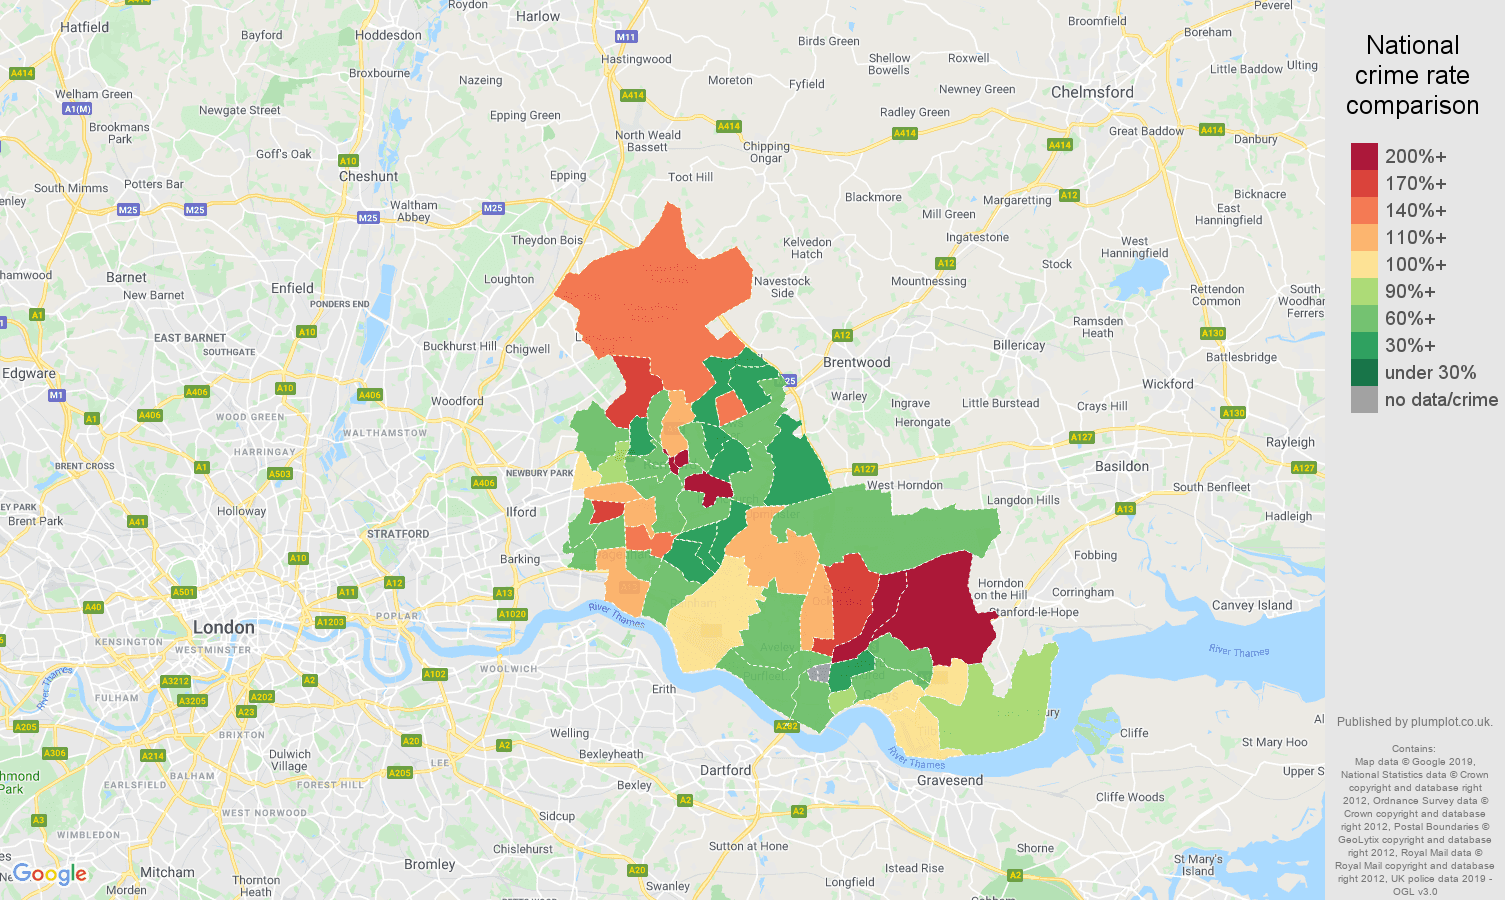 Romford other theft crime rate comparison map